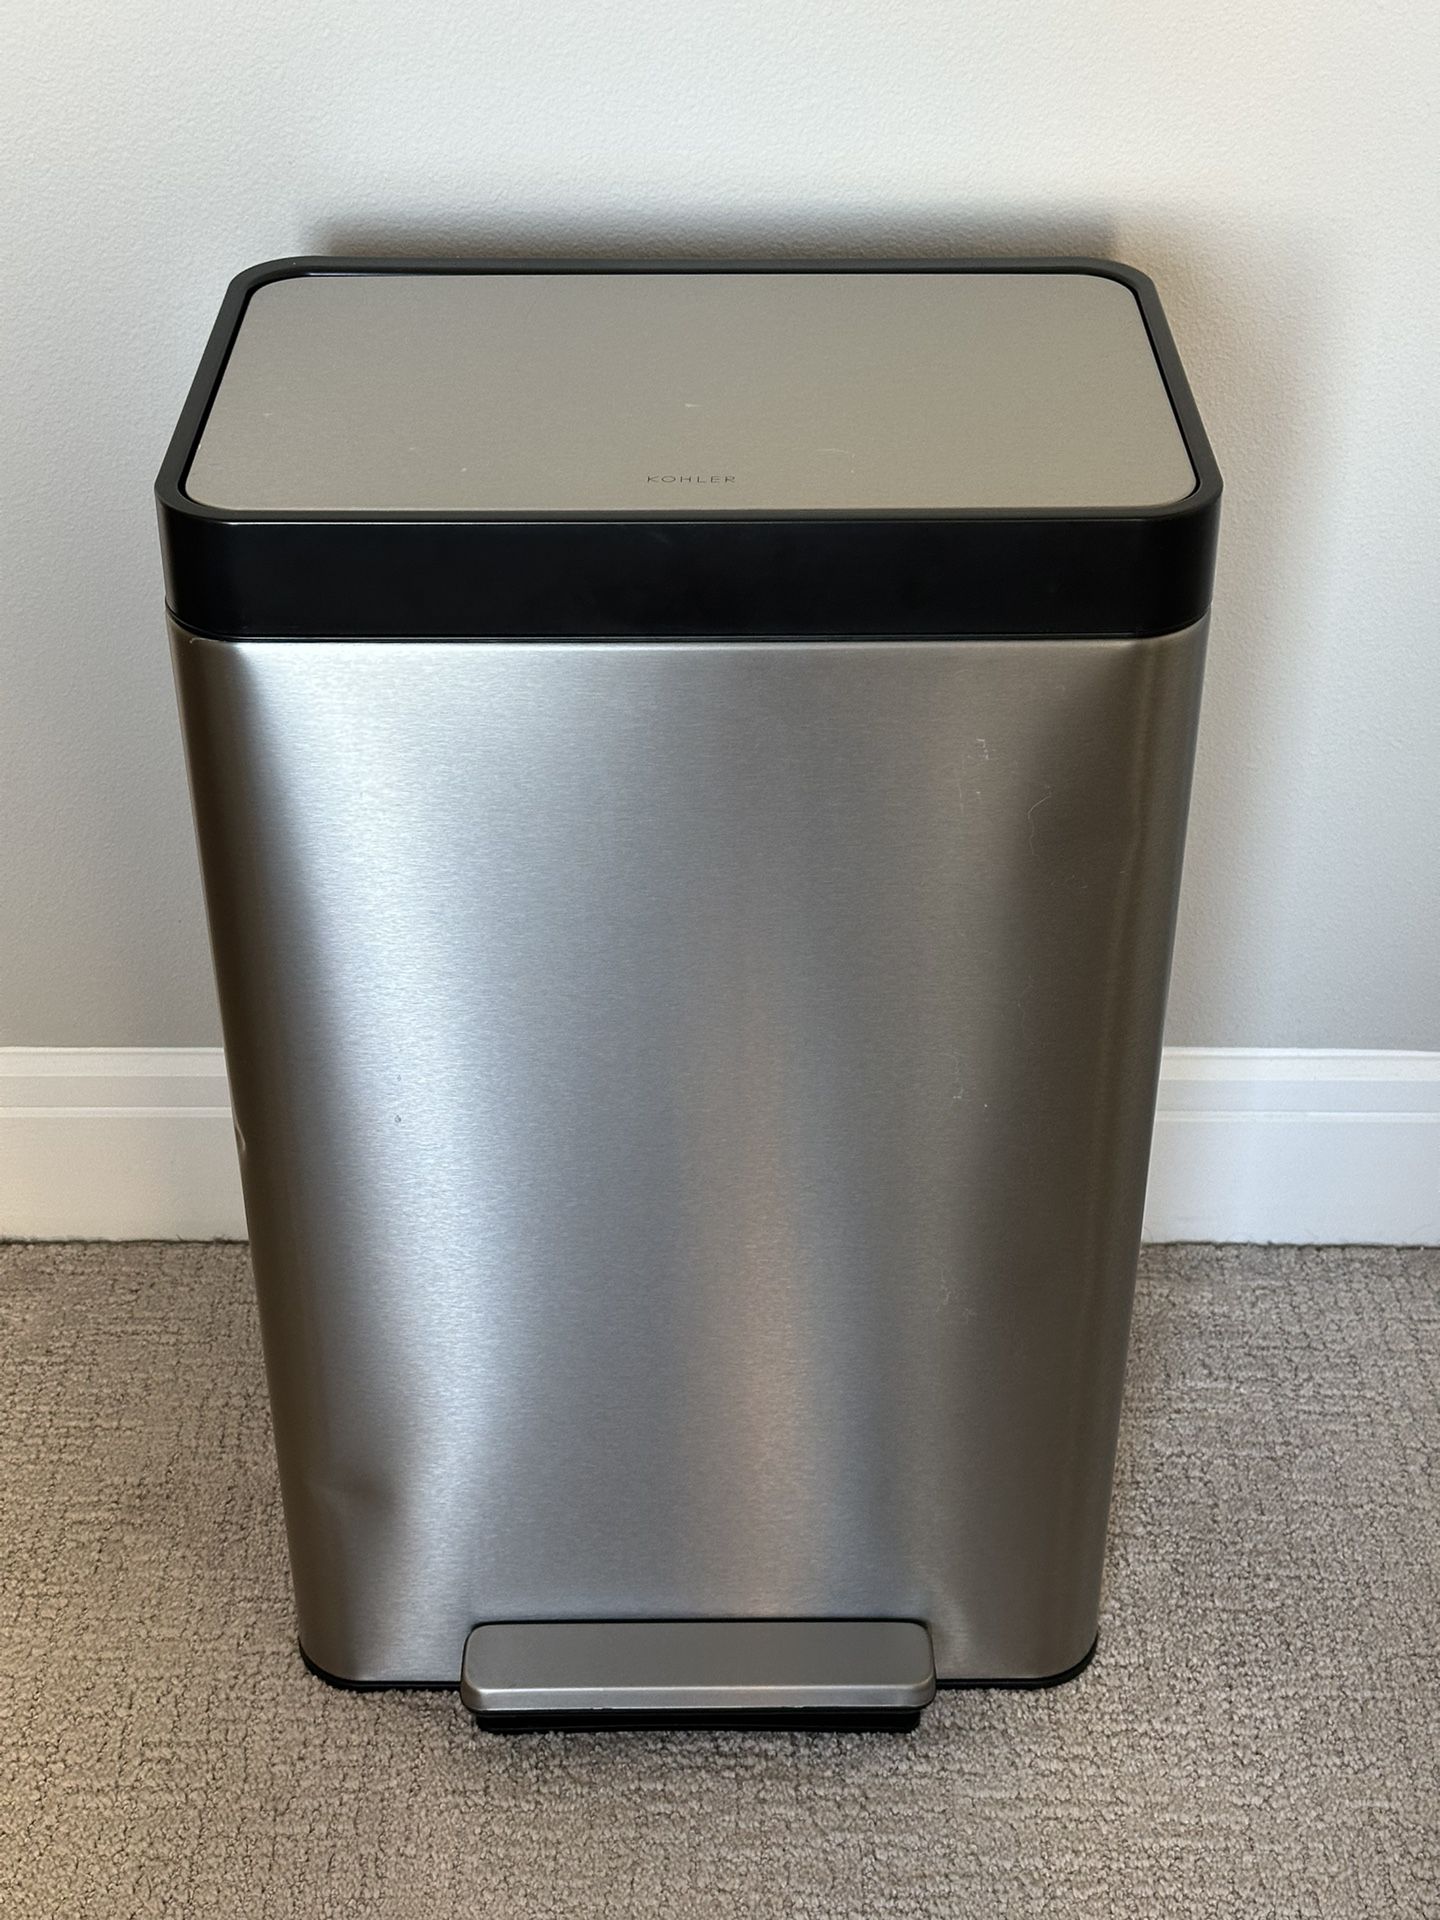 Kohler Hands-Free Recycling Kitchen Step, Trash Can with Foot Pedal, Quiet-Close Lid, 11 Gallon